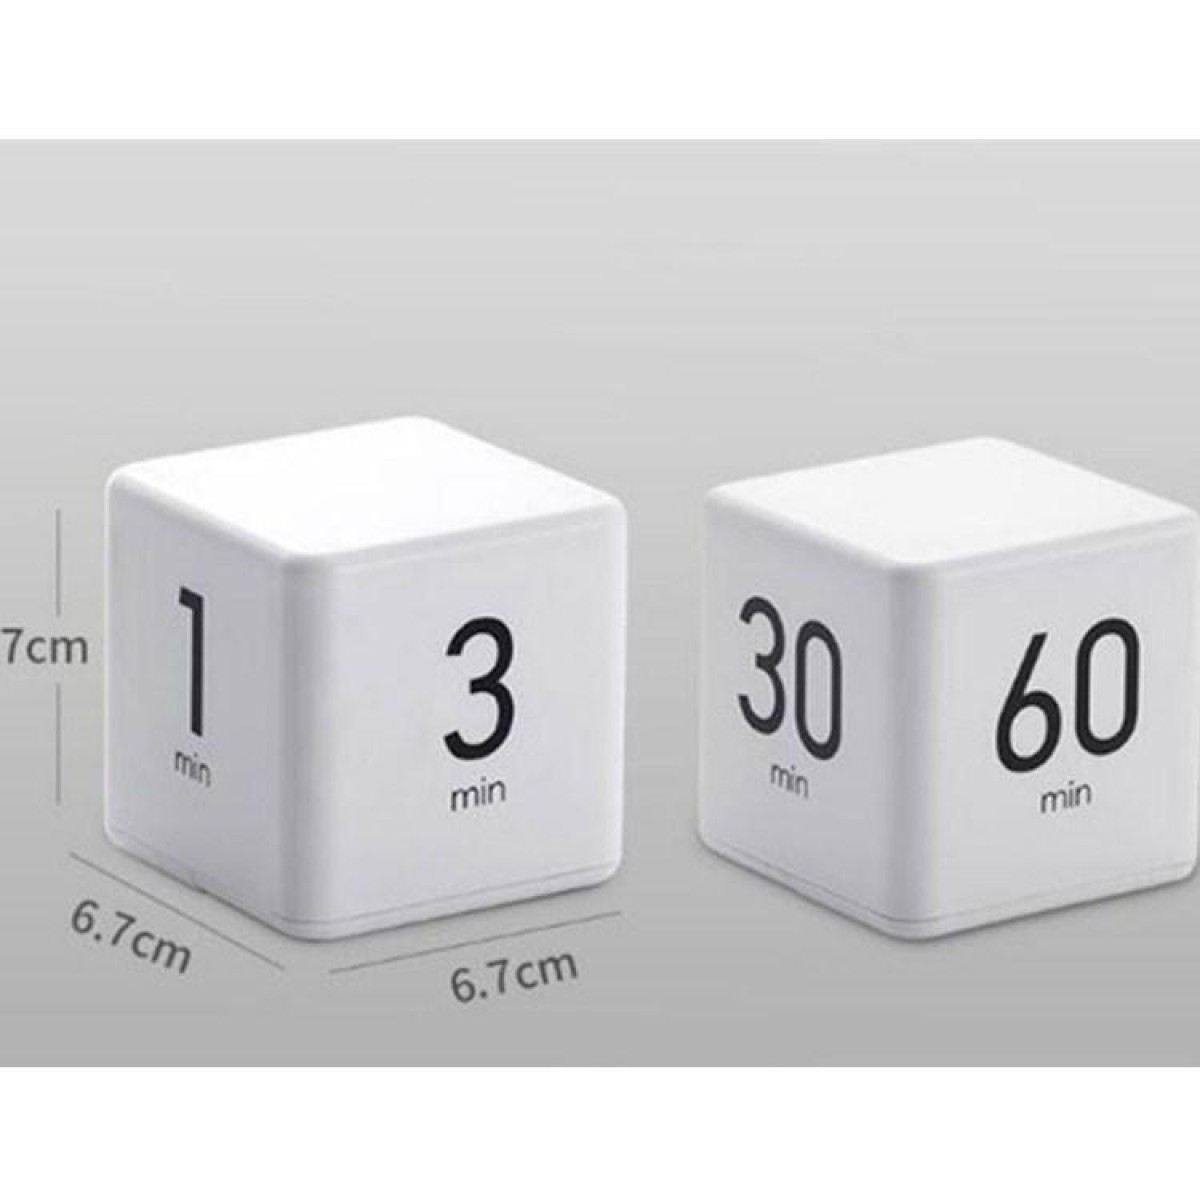 LED Rubiks Cube Time Manager Kitchen Timer, Style:15-20-30-60